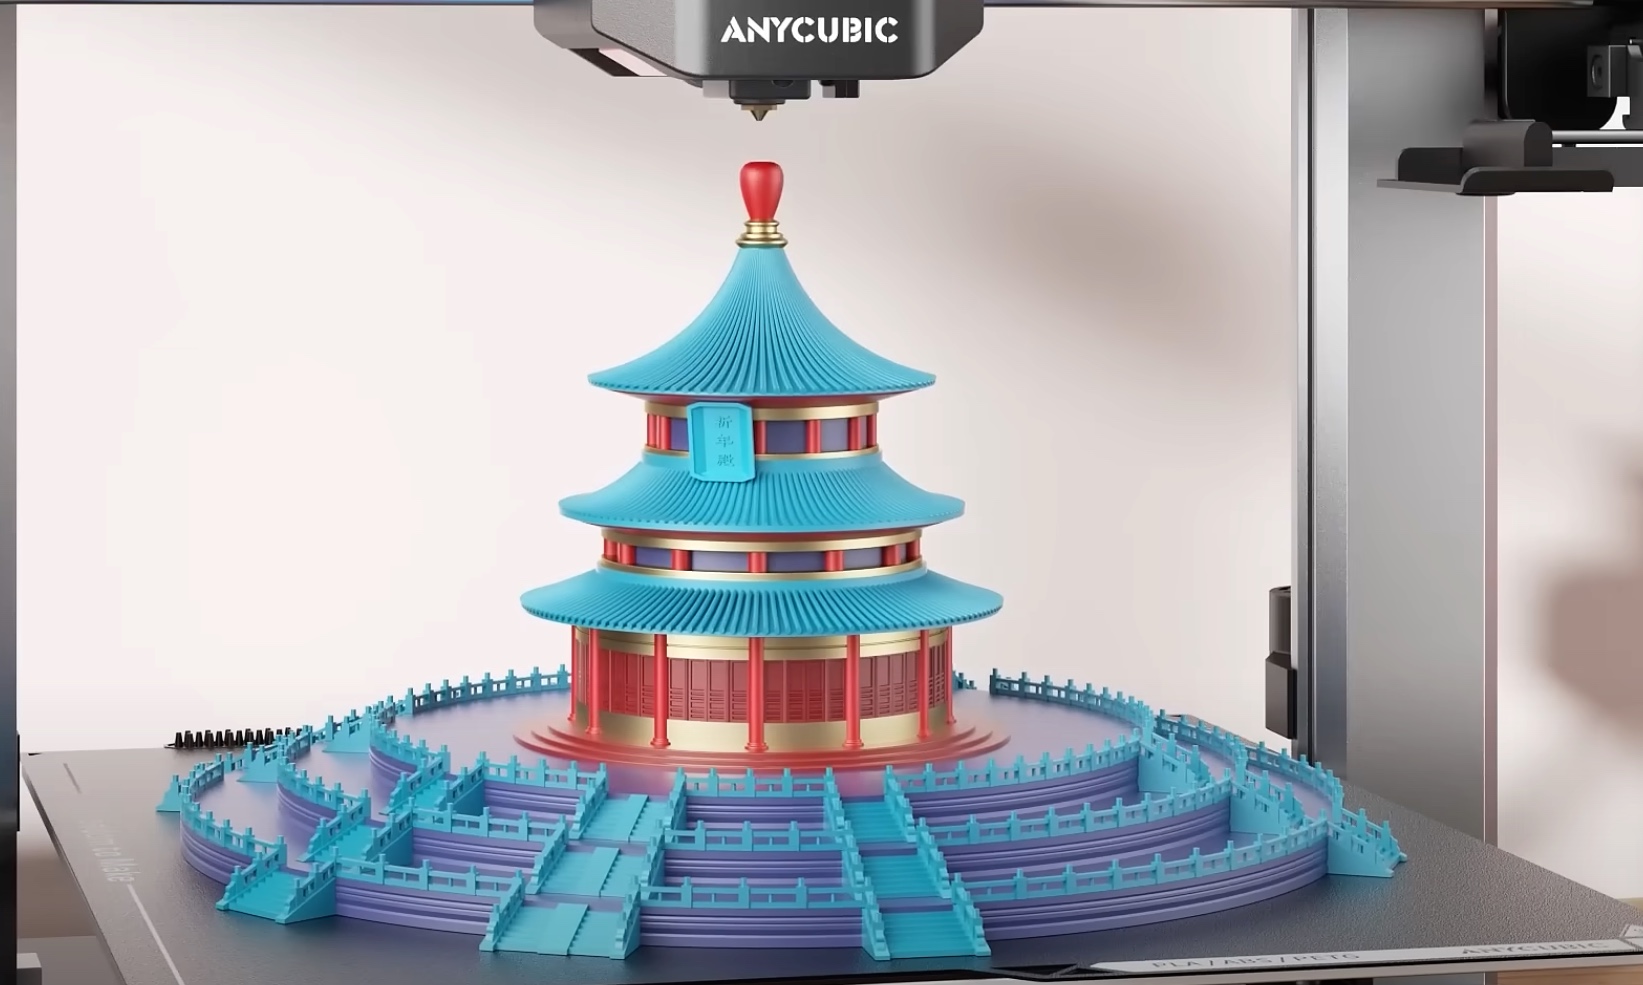 Anycubic Multi Color Printing | The Anycubic Kobra 3 Combo & Photon Mono M7 Pro are coming!